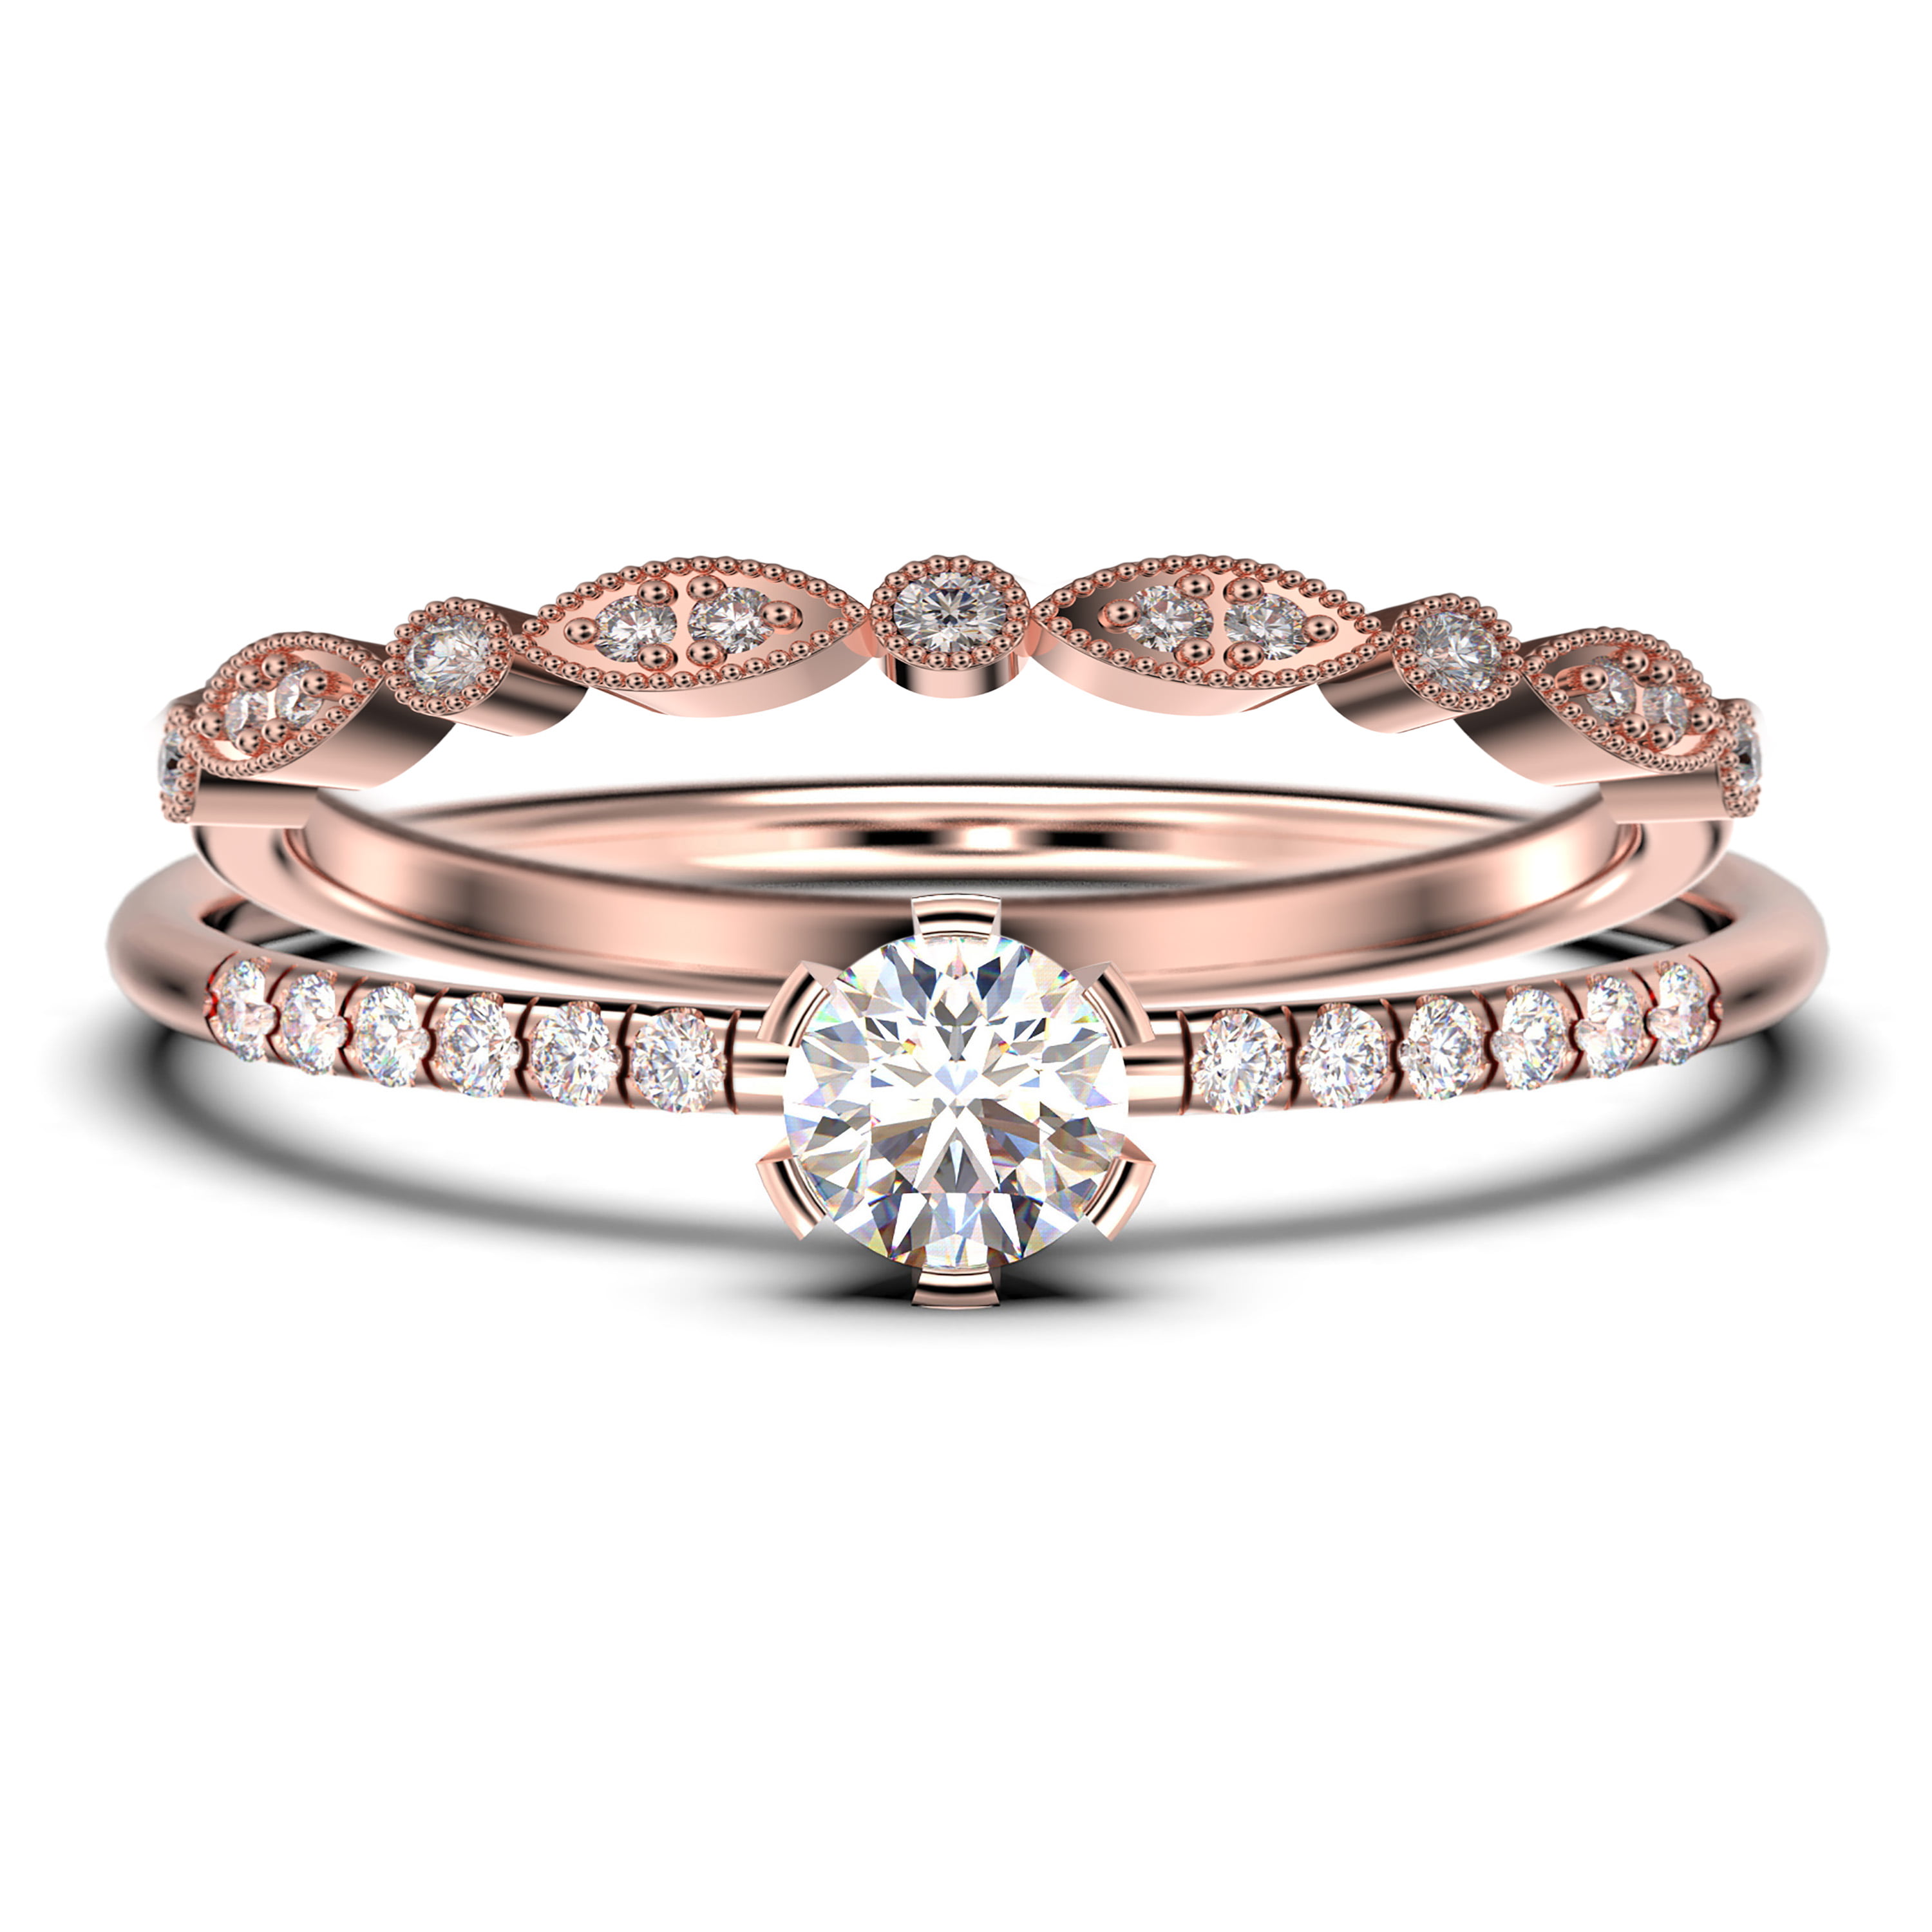 Details about   Rose Gold Ring Set 3 Ct Engagement Wedding Ring Set 925 Silver Bridal Rings NEW 